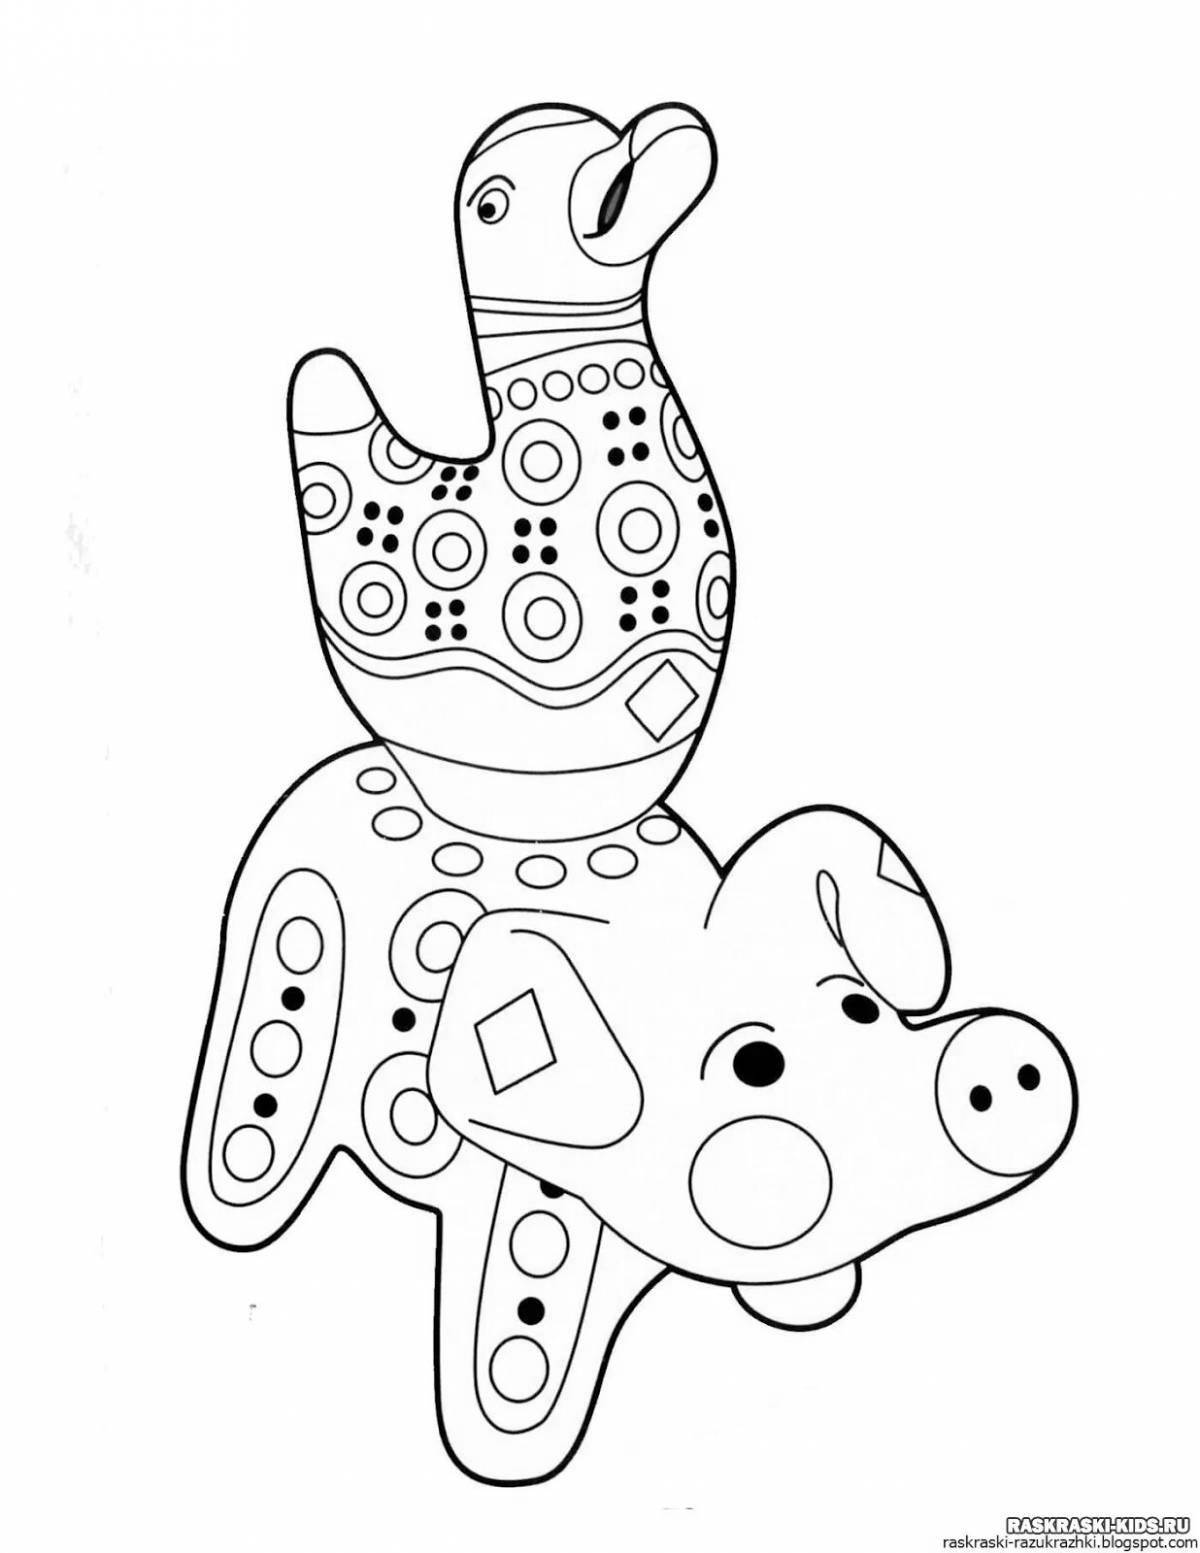 Playful baby whistle coloring book